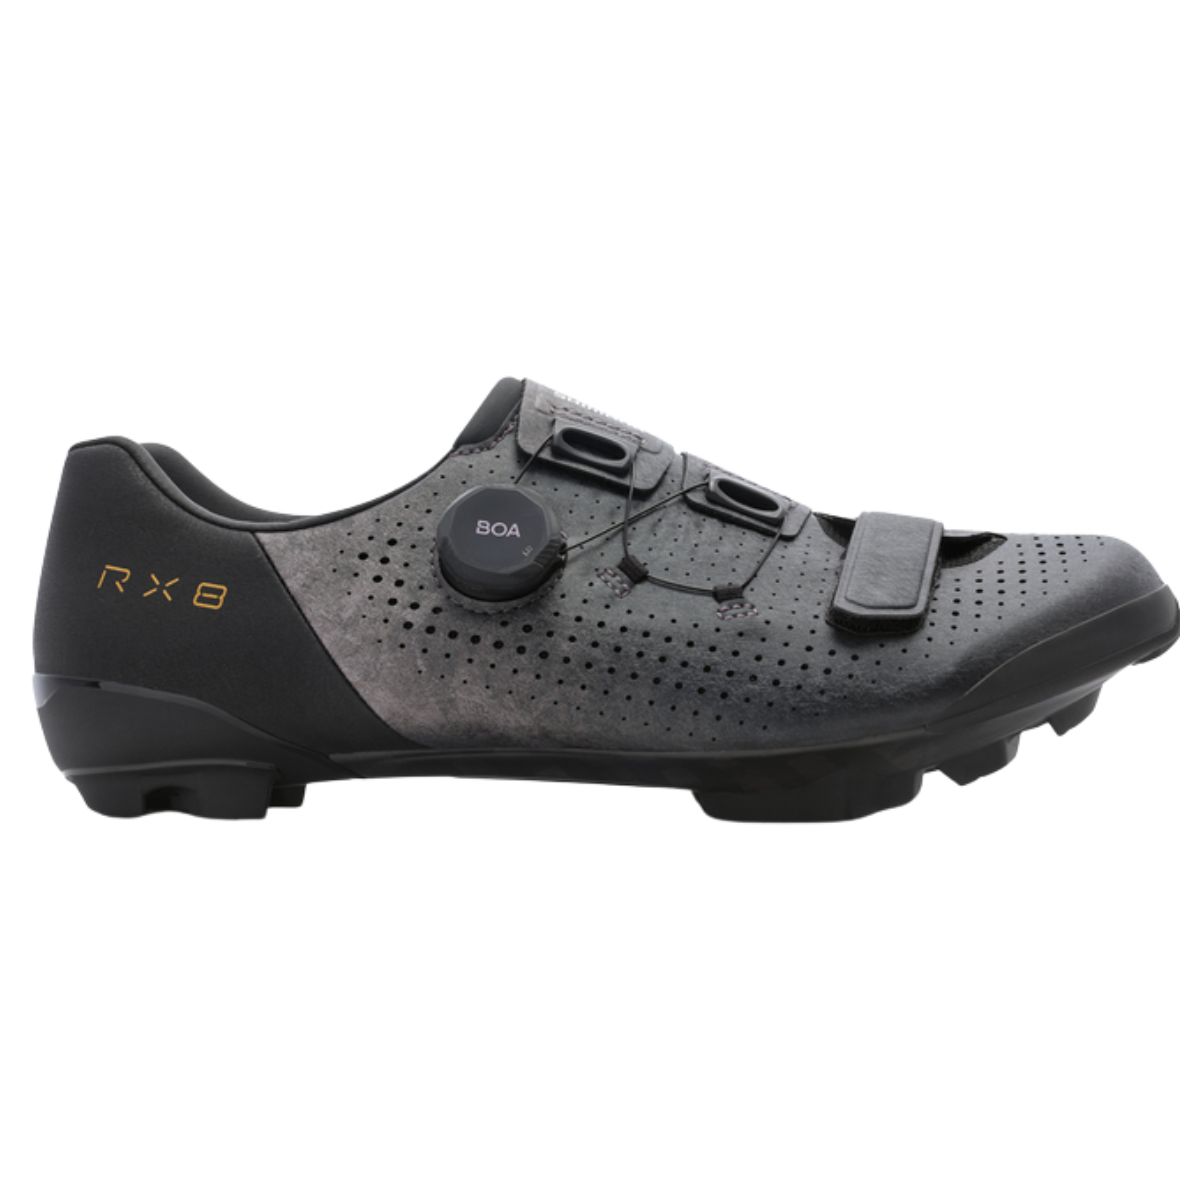 SH-XC702 Bicycle Shoes Black 43.0 Wide